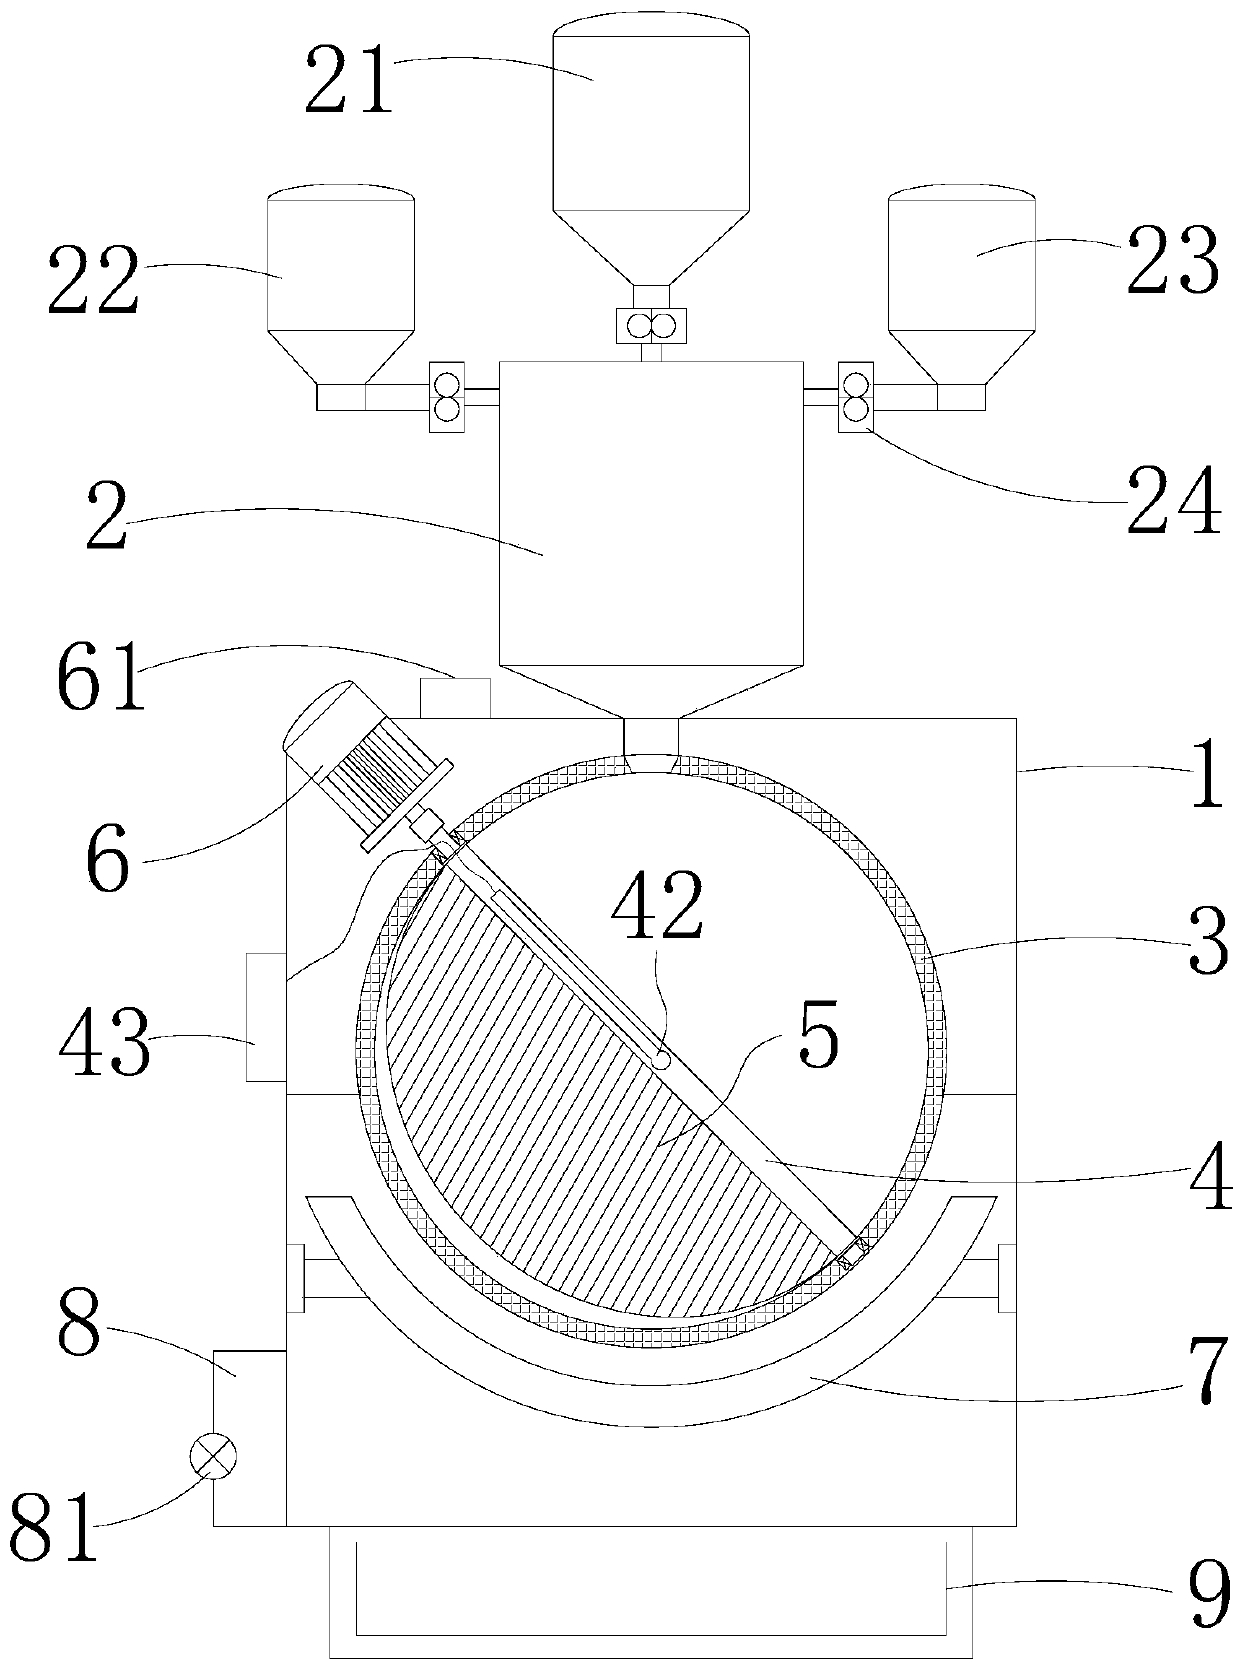 Gelatin melting device with controllable gelatin solution viscosity